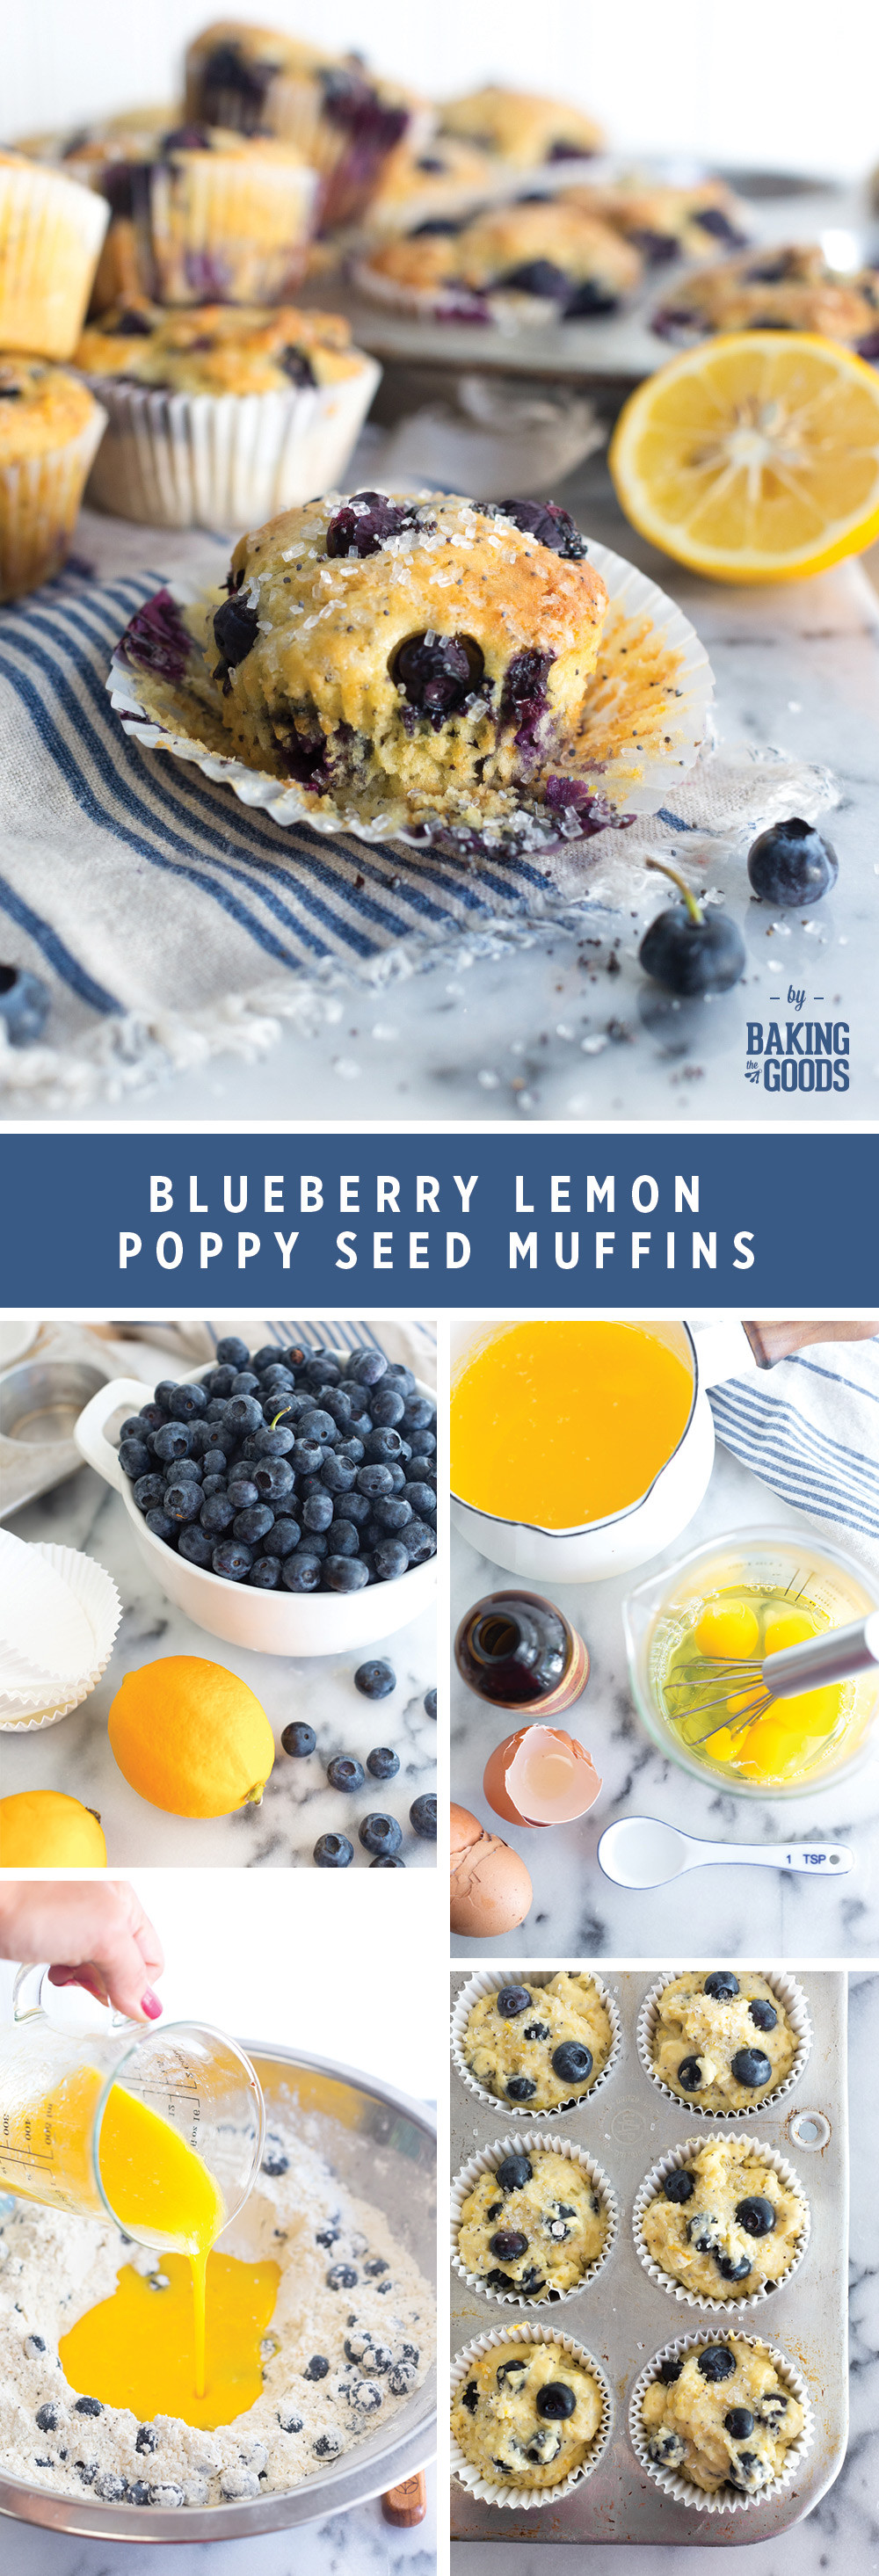 Blueberry Lemon Poppy Seed Muffins by Baking The Goods.